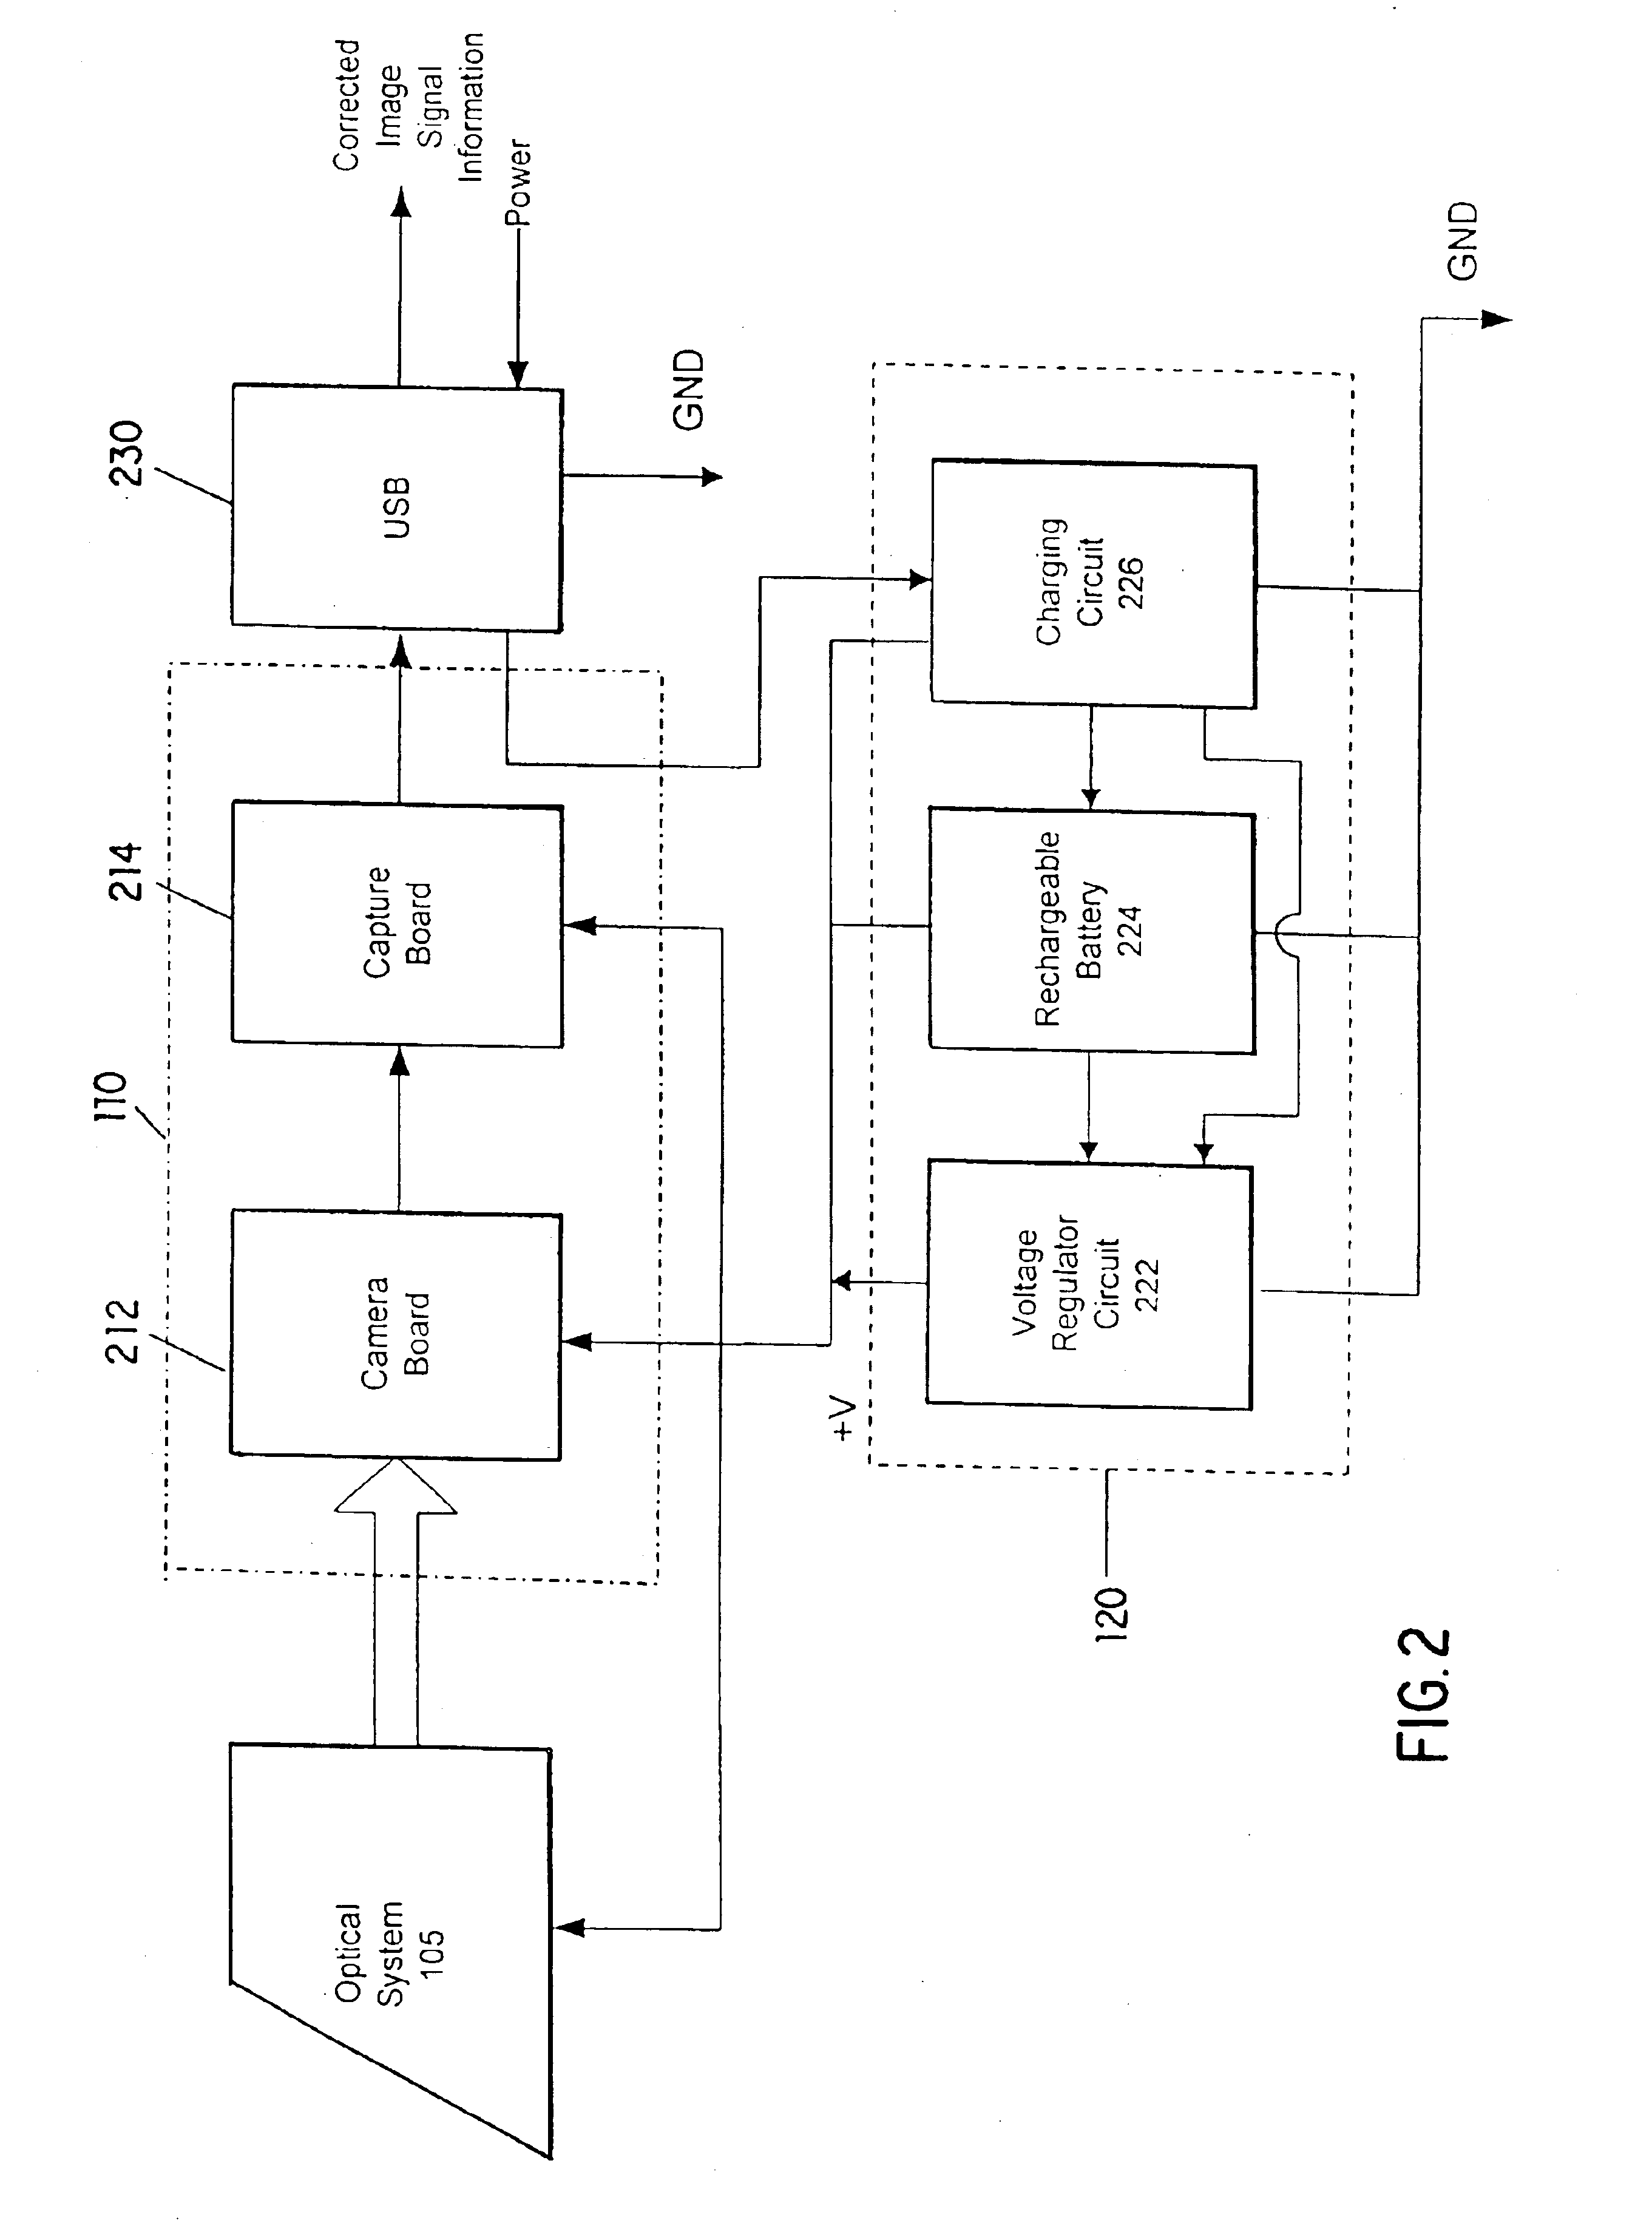 Rechargeable mobile hand-held fingerprint scanner with a data and power communication interface